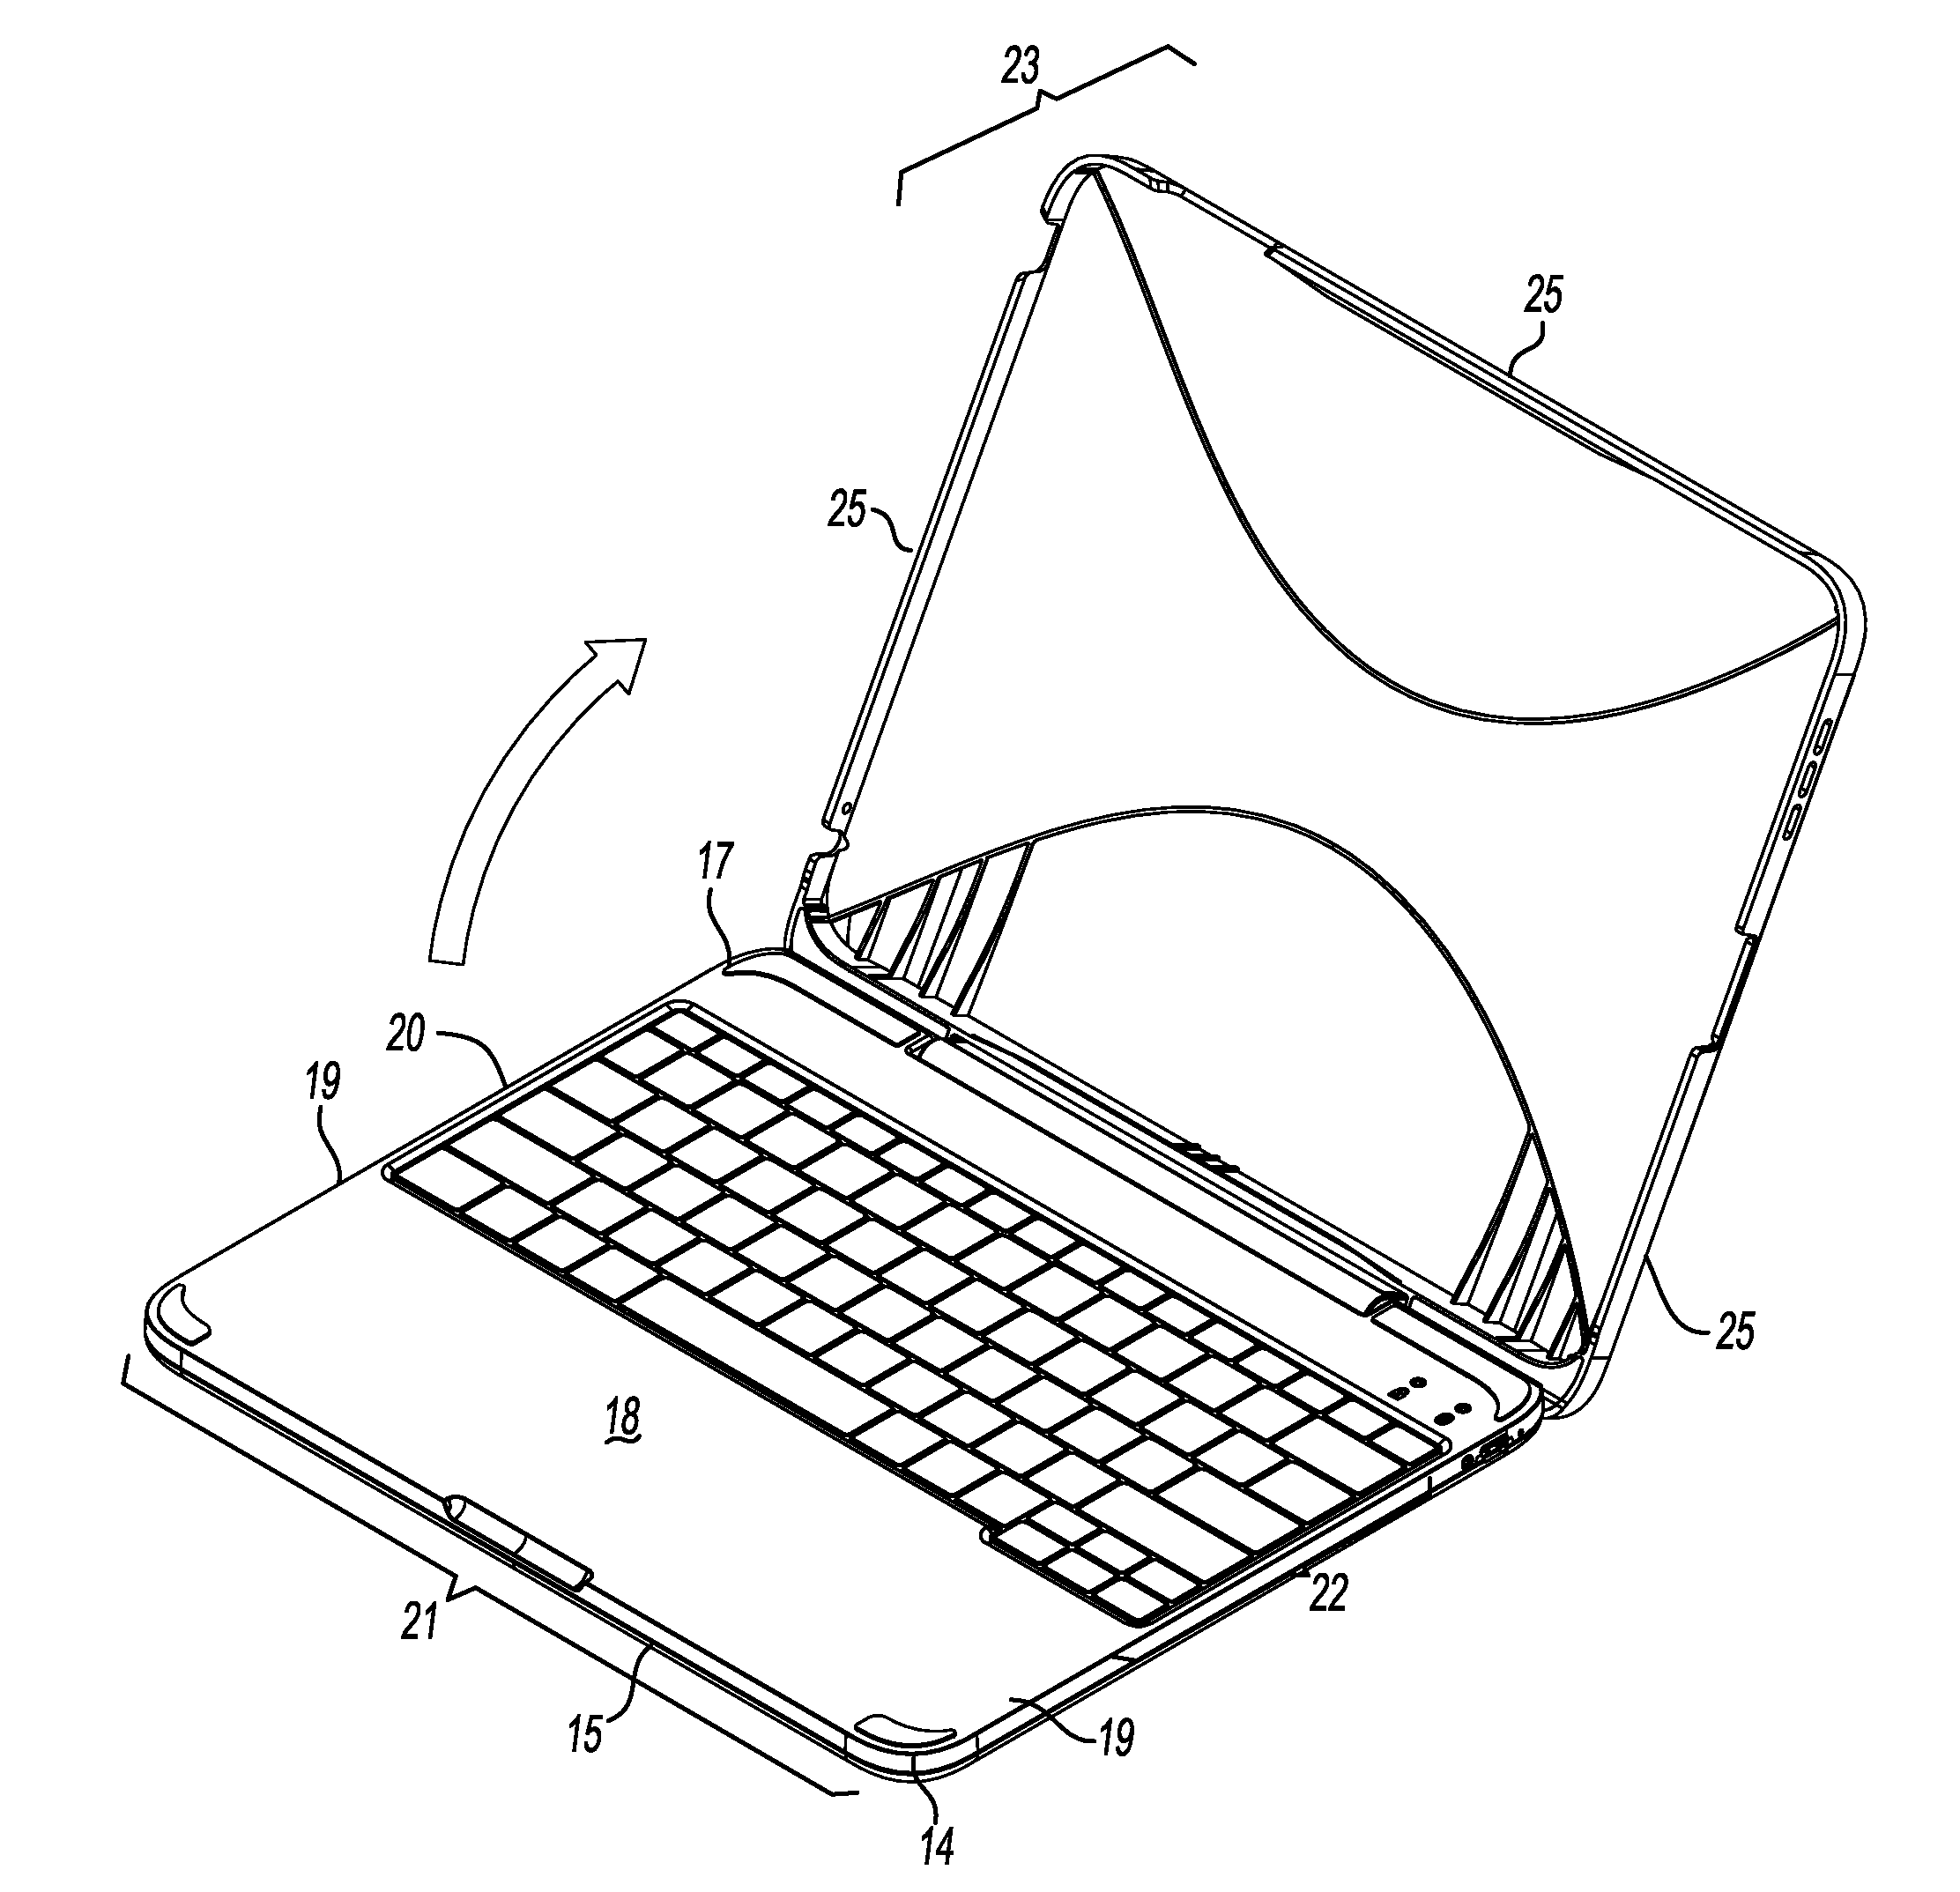 Electronic device case and method of use